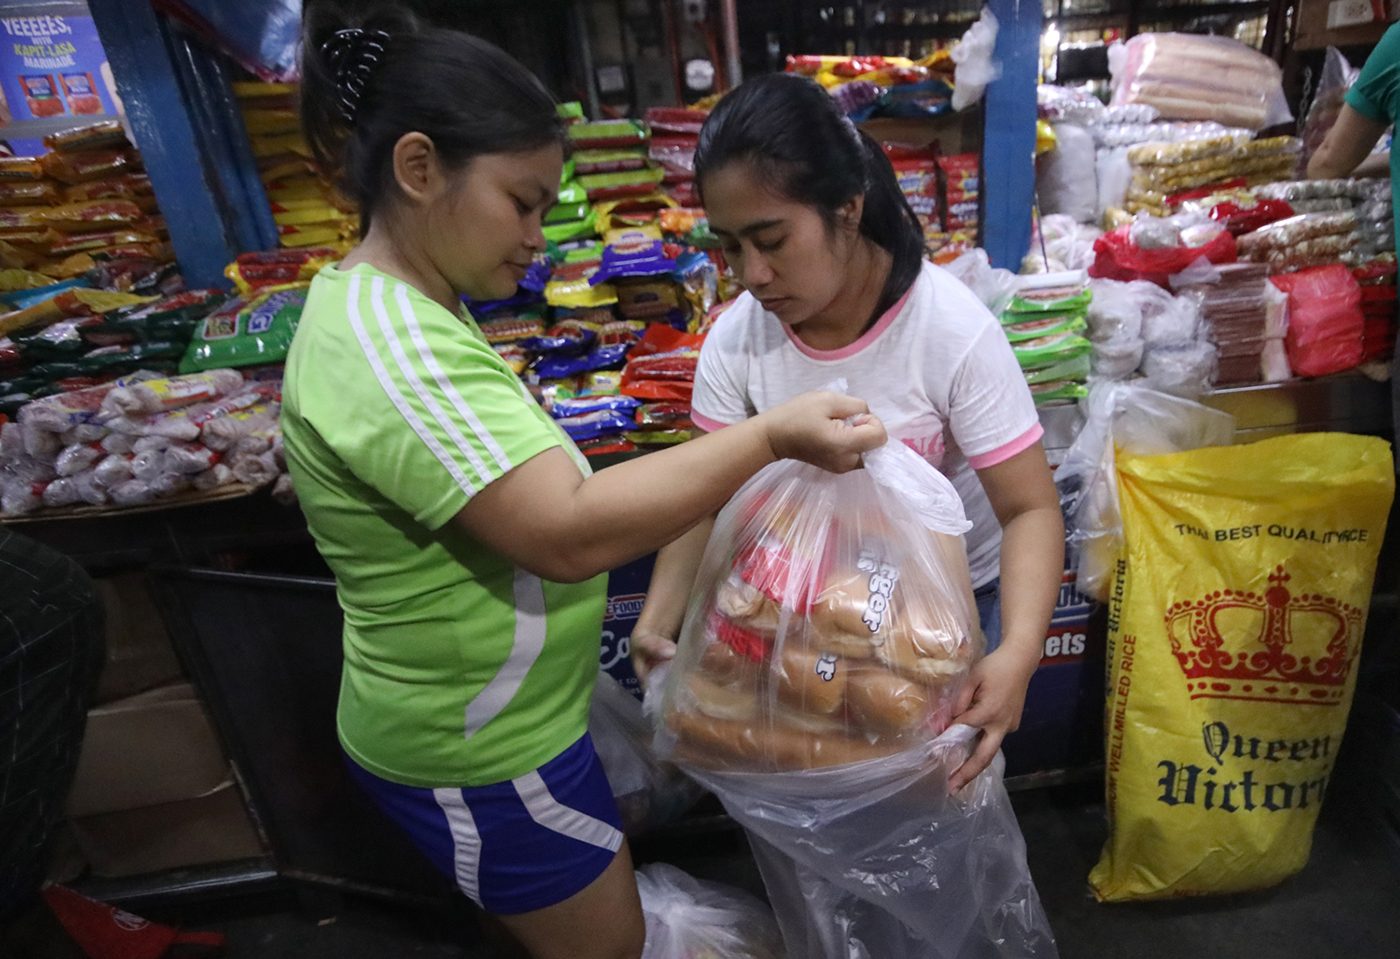 Inflation slows down further to 4.4% in January 2019